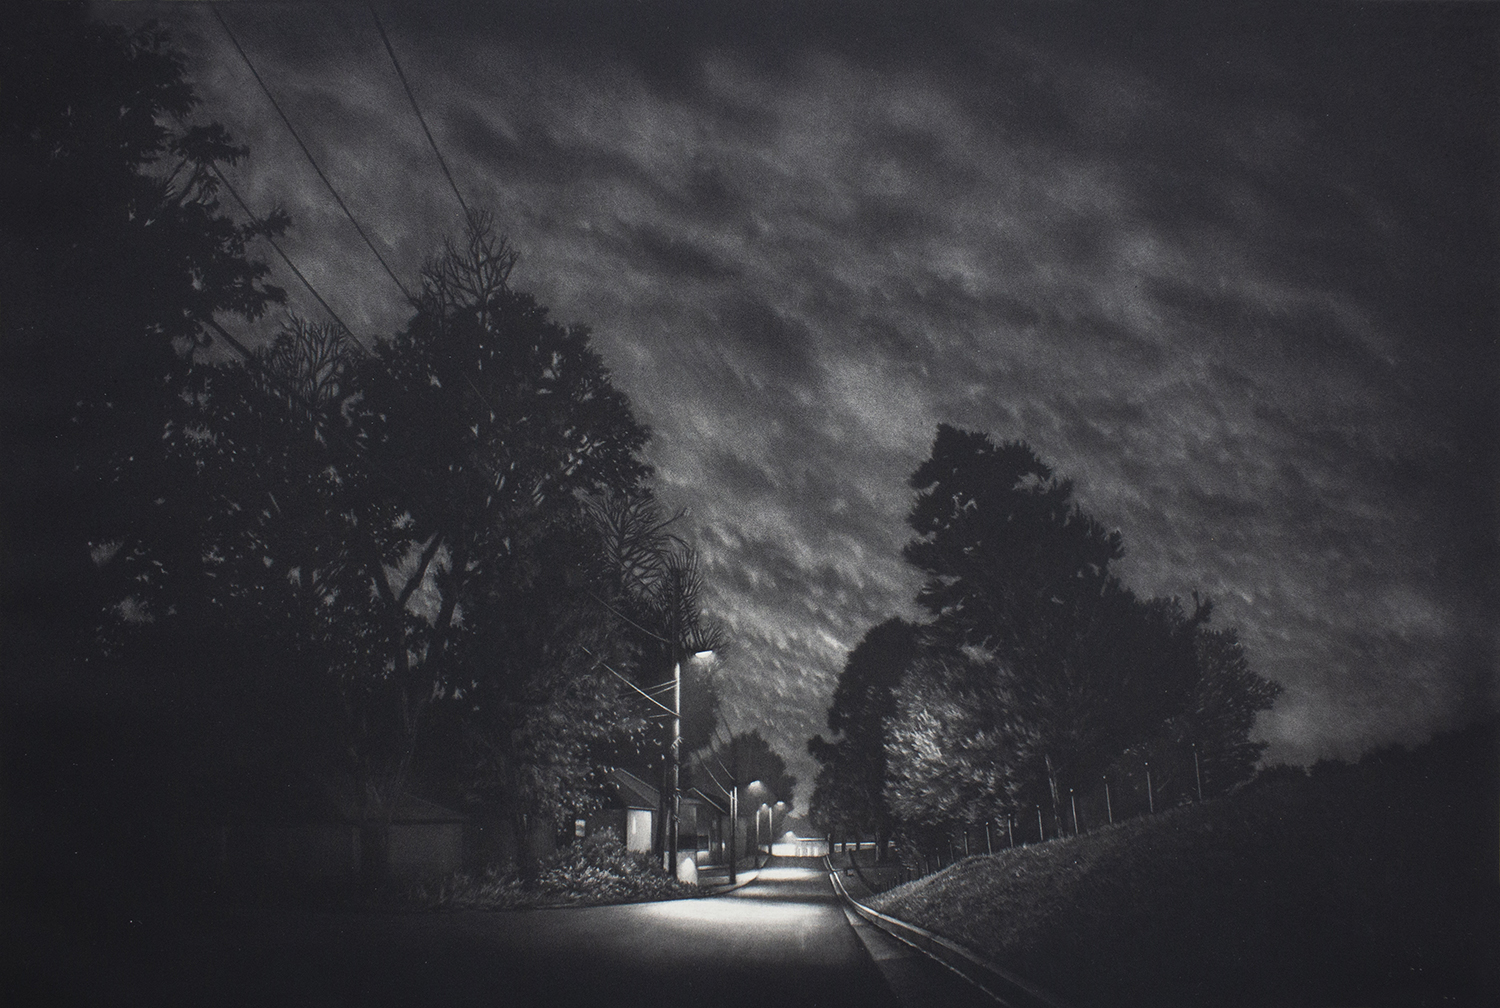 Black and white image of a dark neighborhood street lit by street lamps at night. The sky if full of clouds reflecting the light of the street lamps spotlighting the street. A row of houses line the street on the left side of the road.